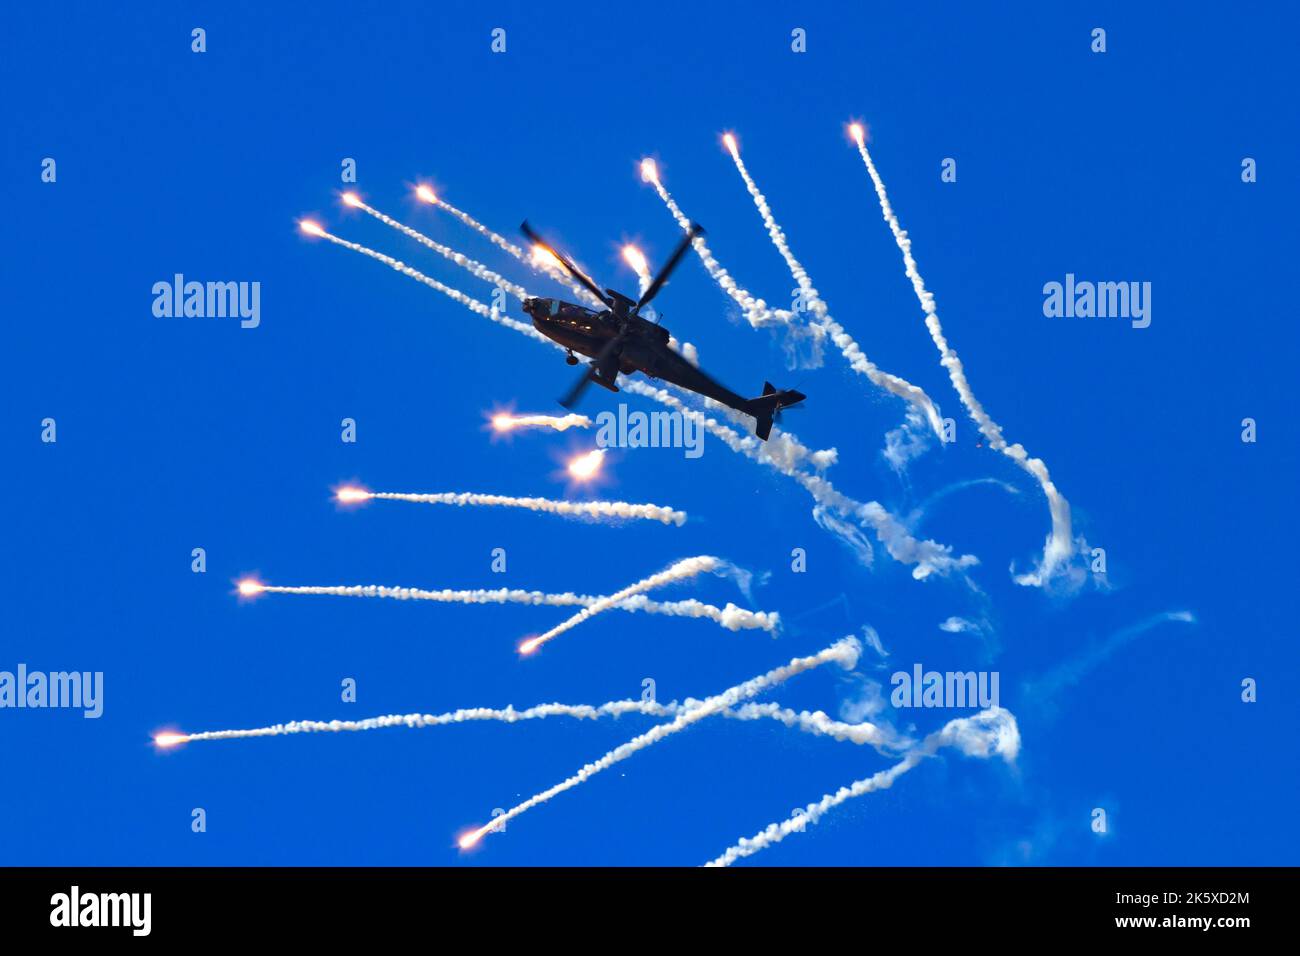 Boeing AH-64 Apache attack helicopter firing flares during a flight demonstration at Kleine Brogel, Belgium - September 13, 2014 Stock Photo